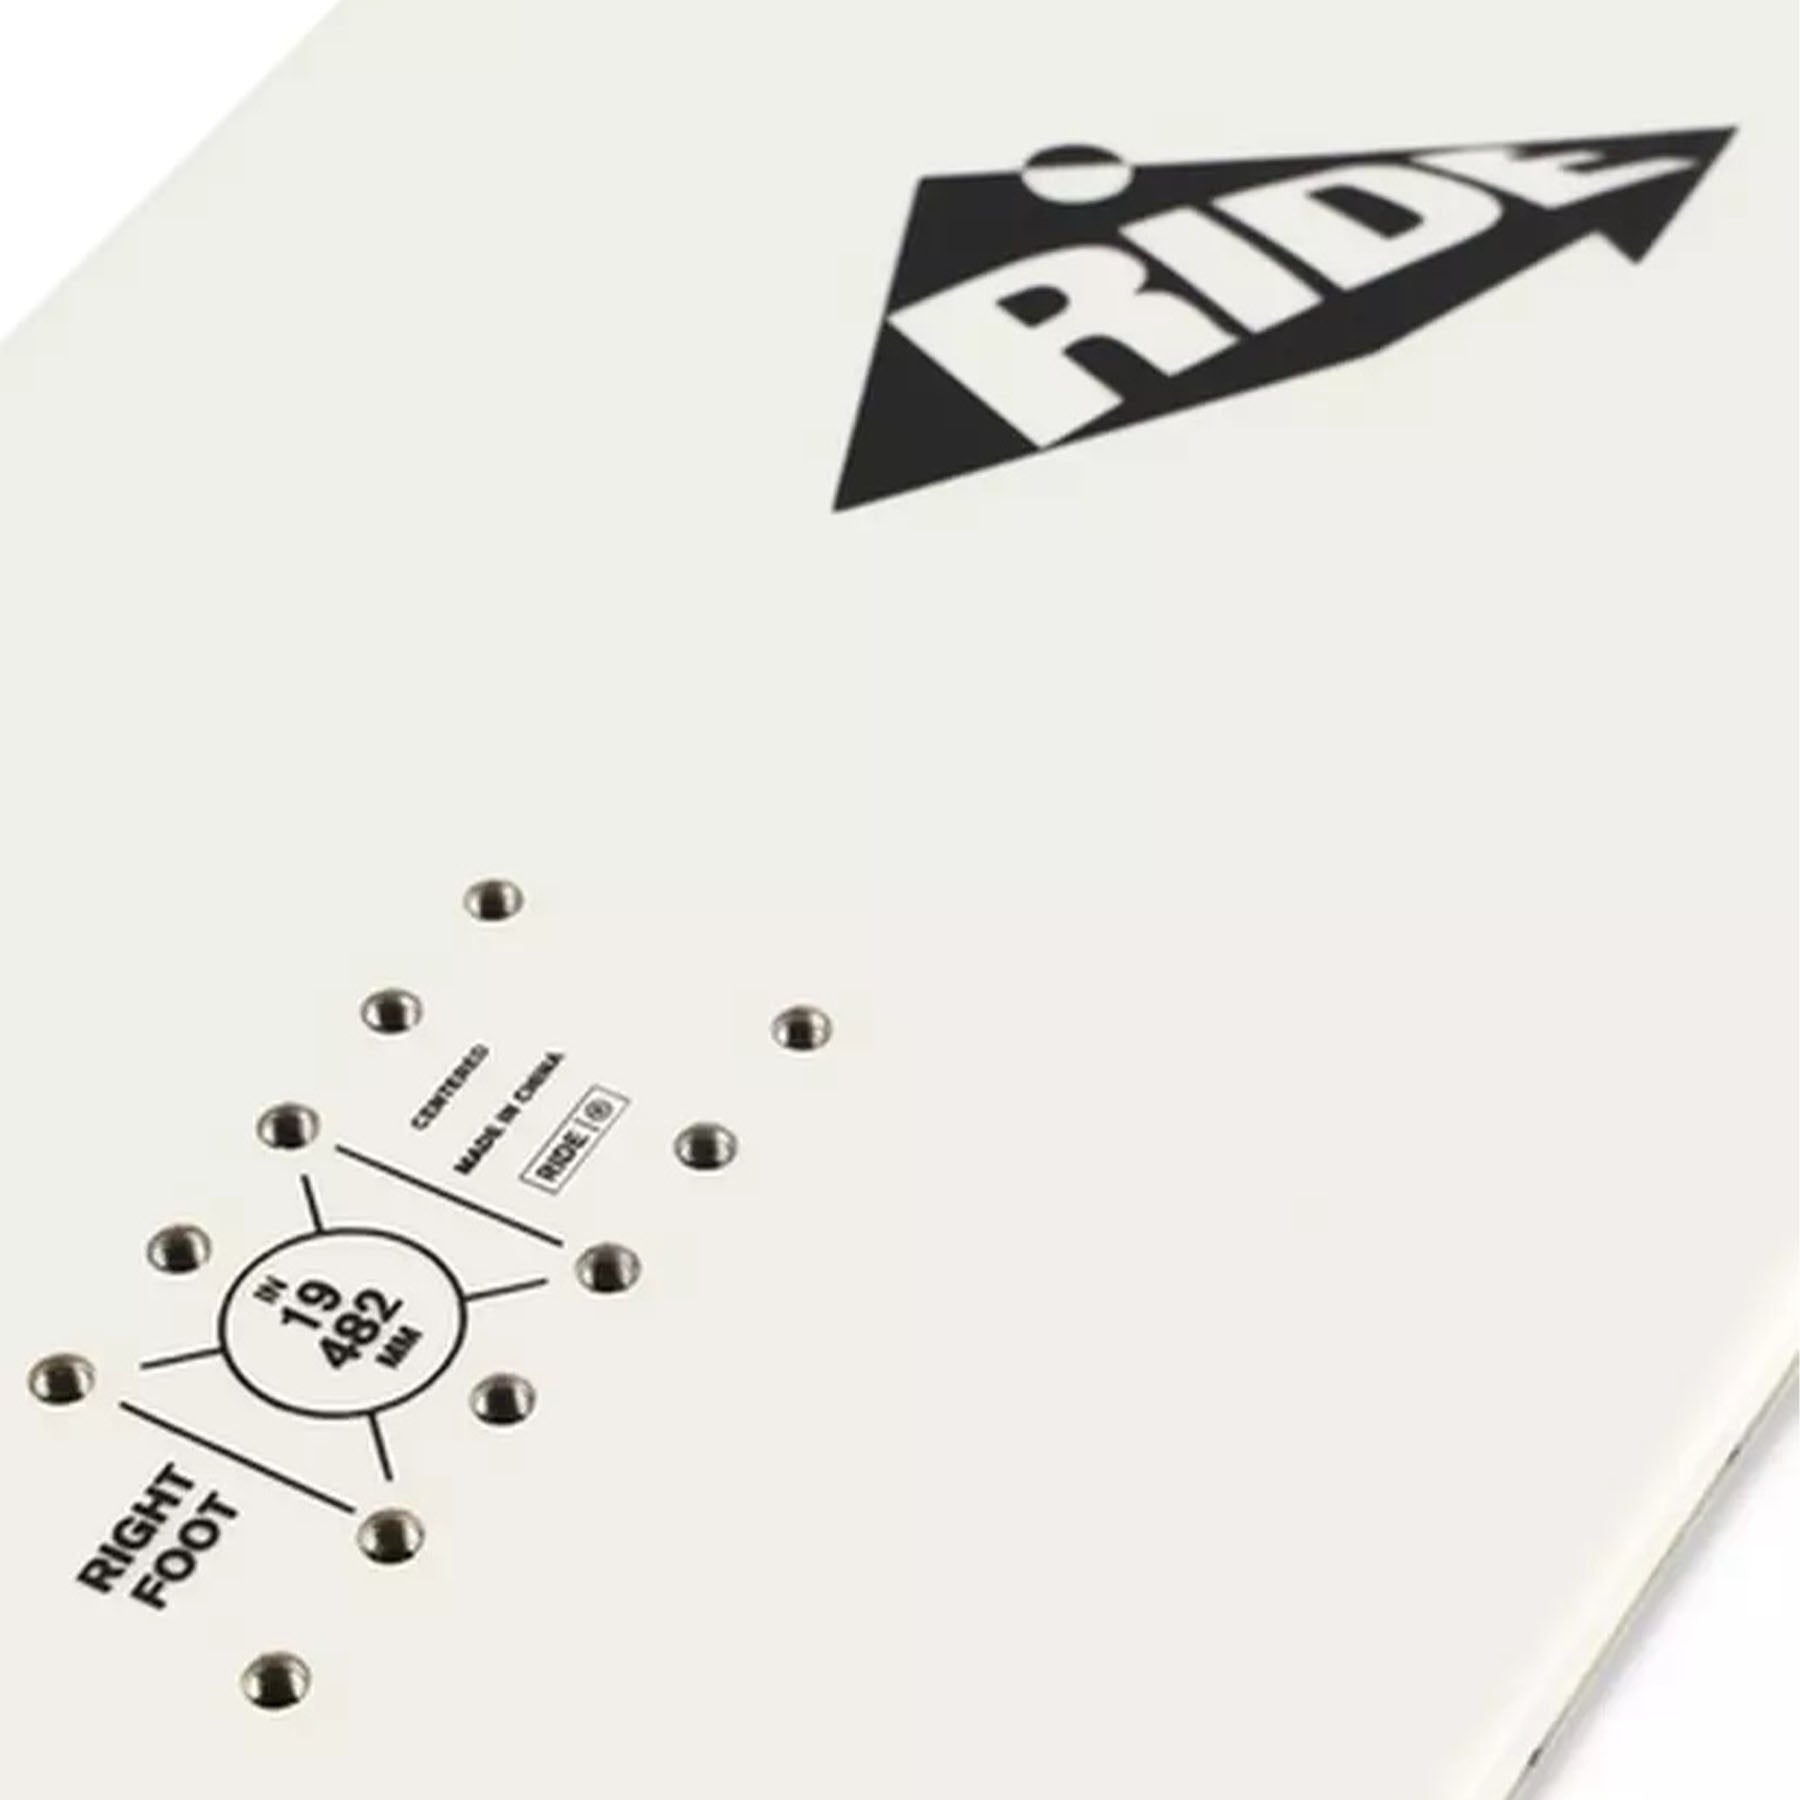 Image features the deck of the Ride Zero snowboard in white with sizing info printed in black as well as a white and black Ride logo.